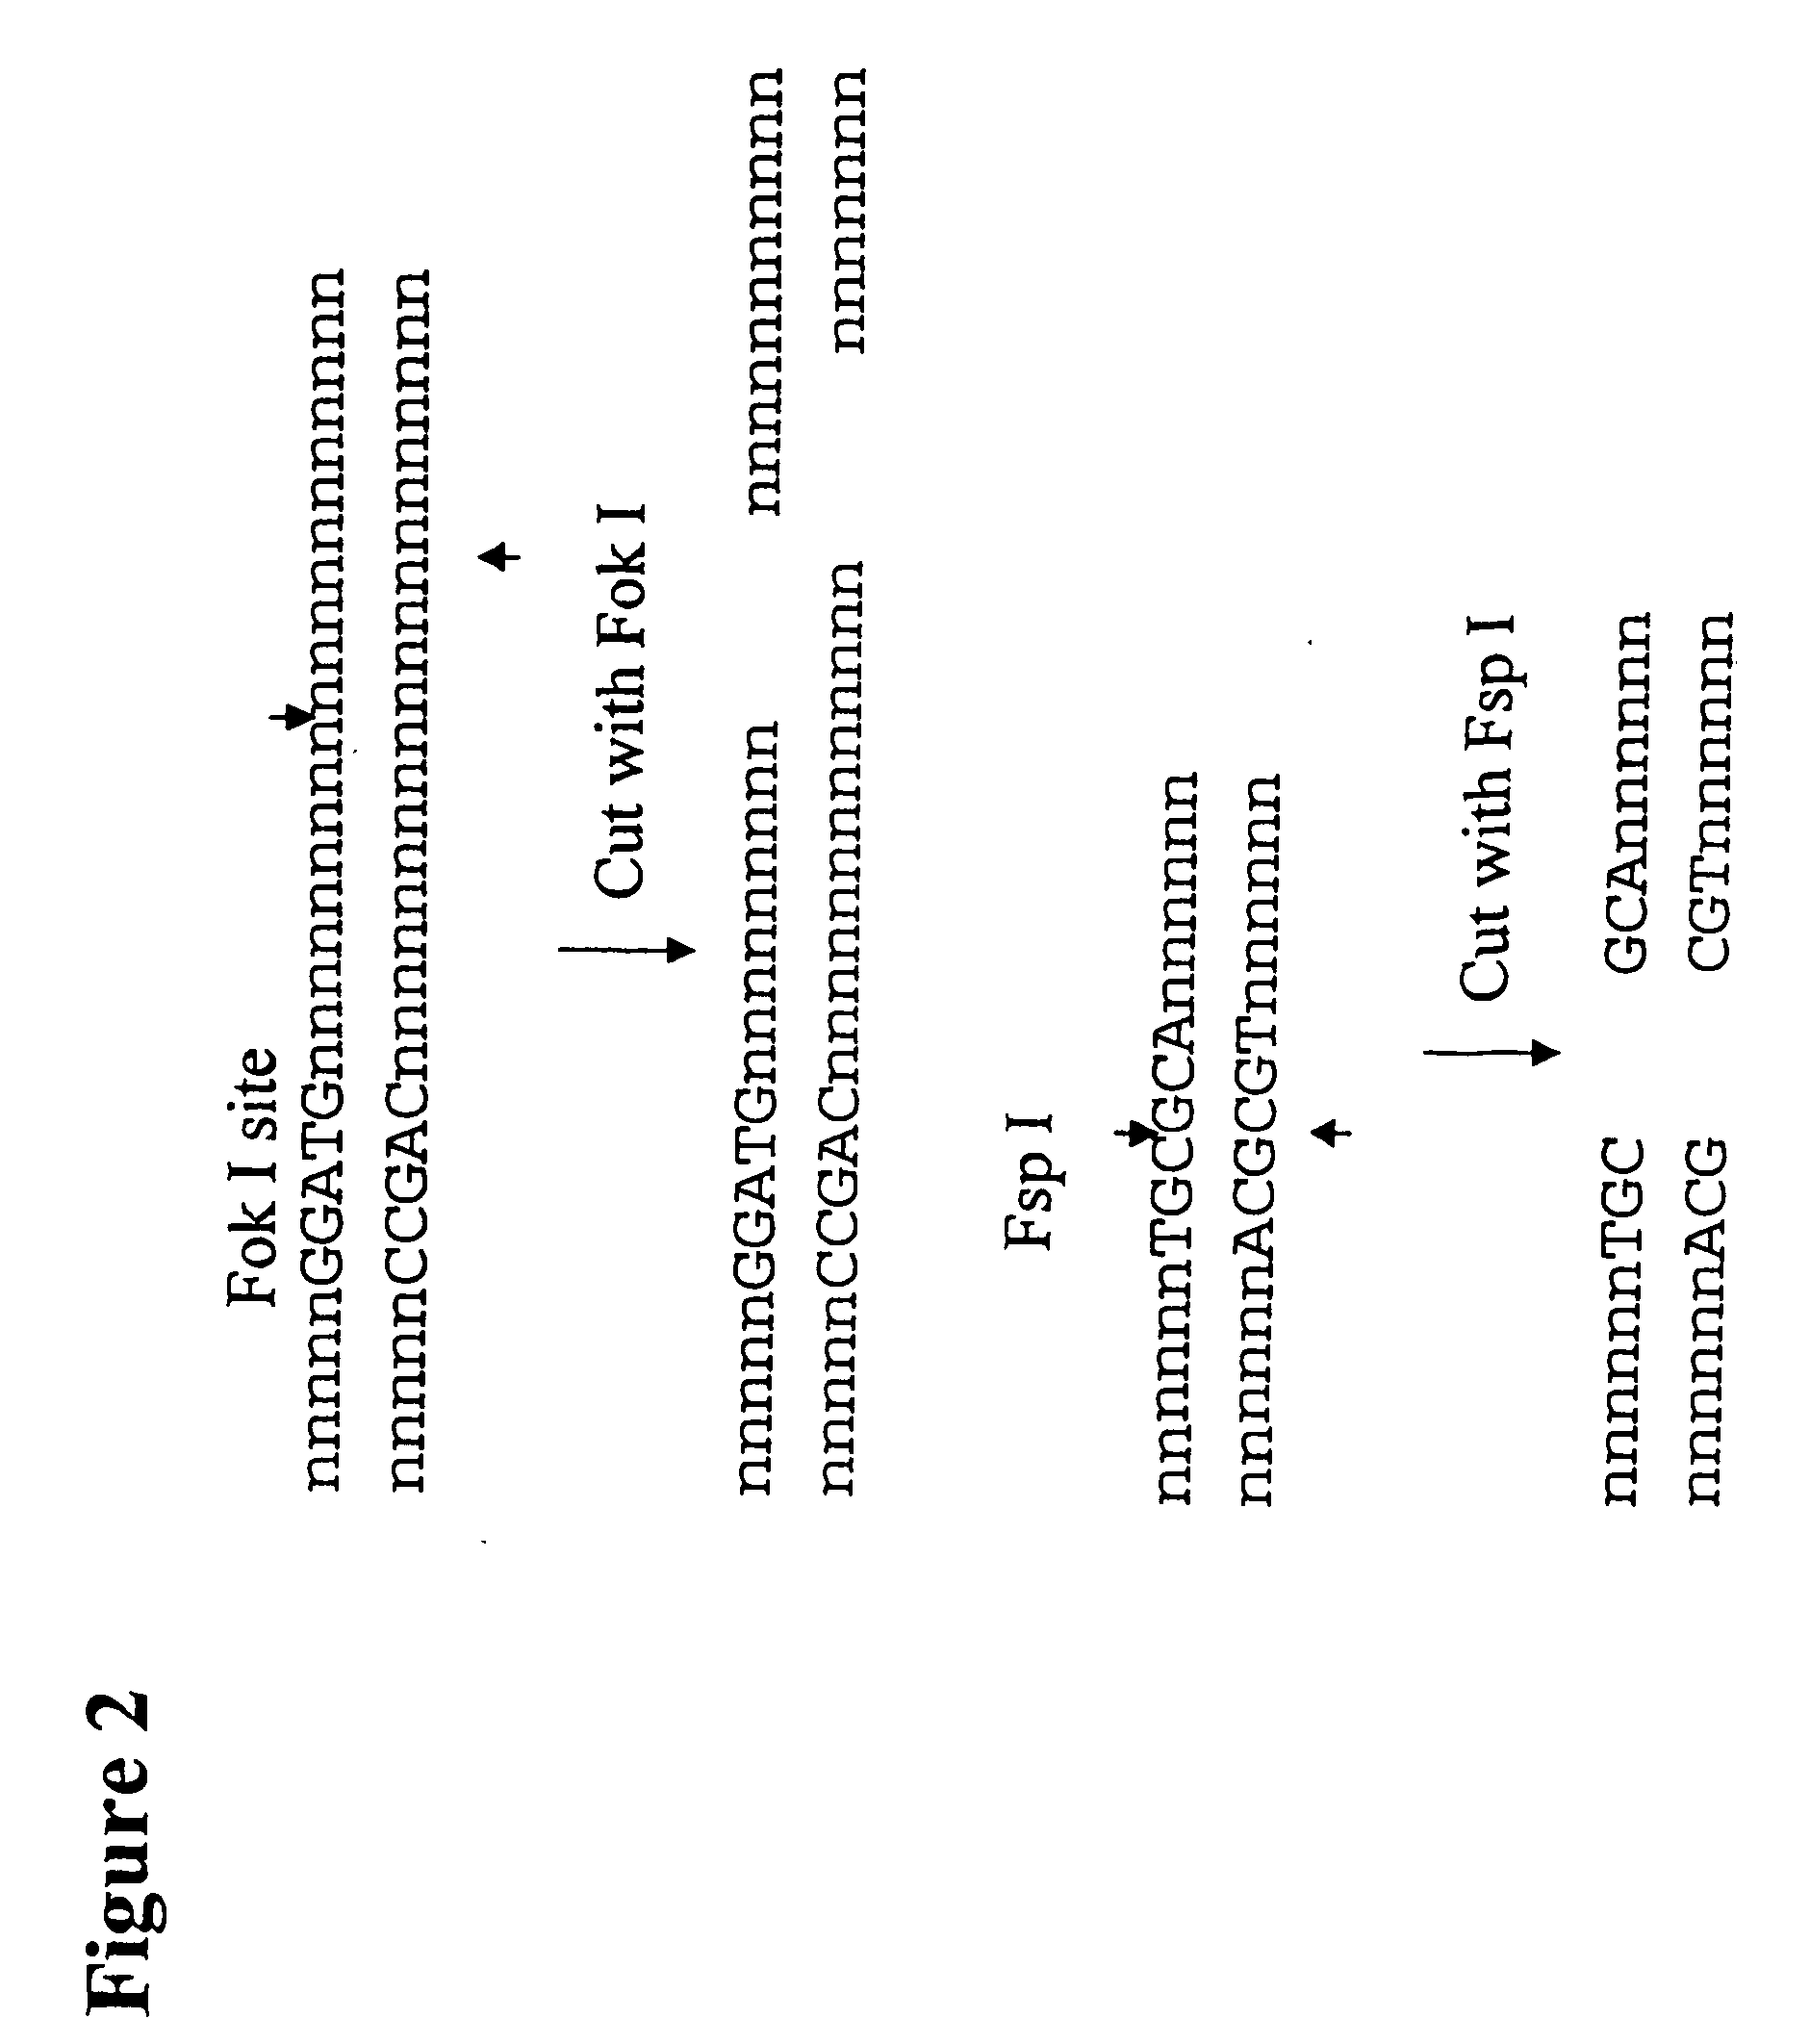 Methods for genetic analysis of DNA to detect sequence variances